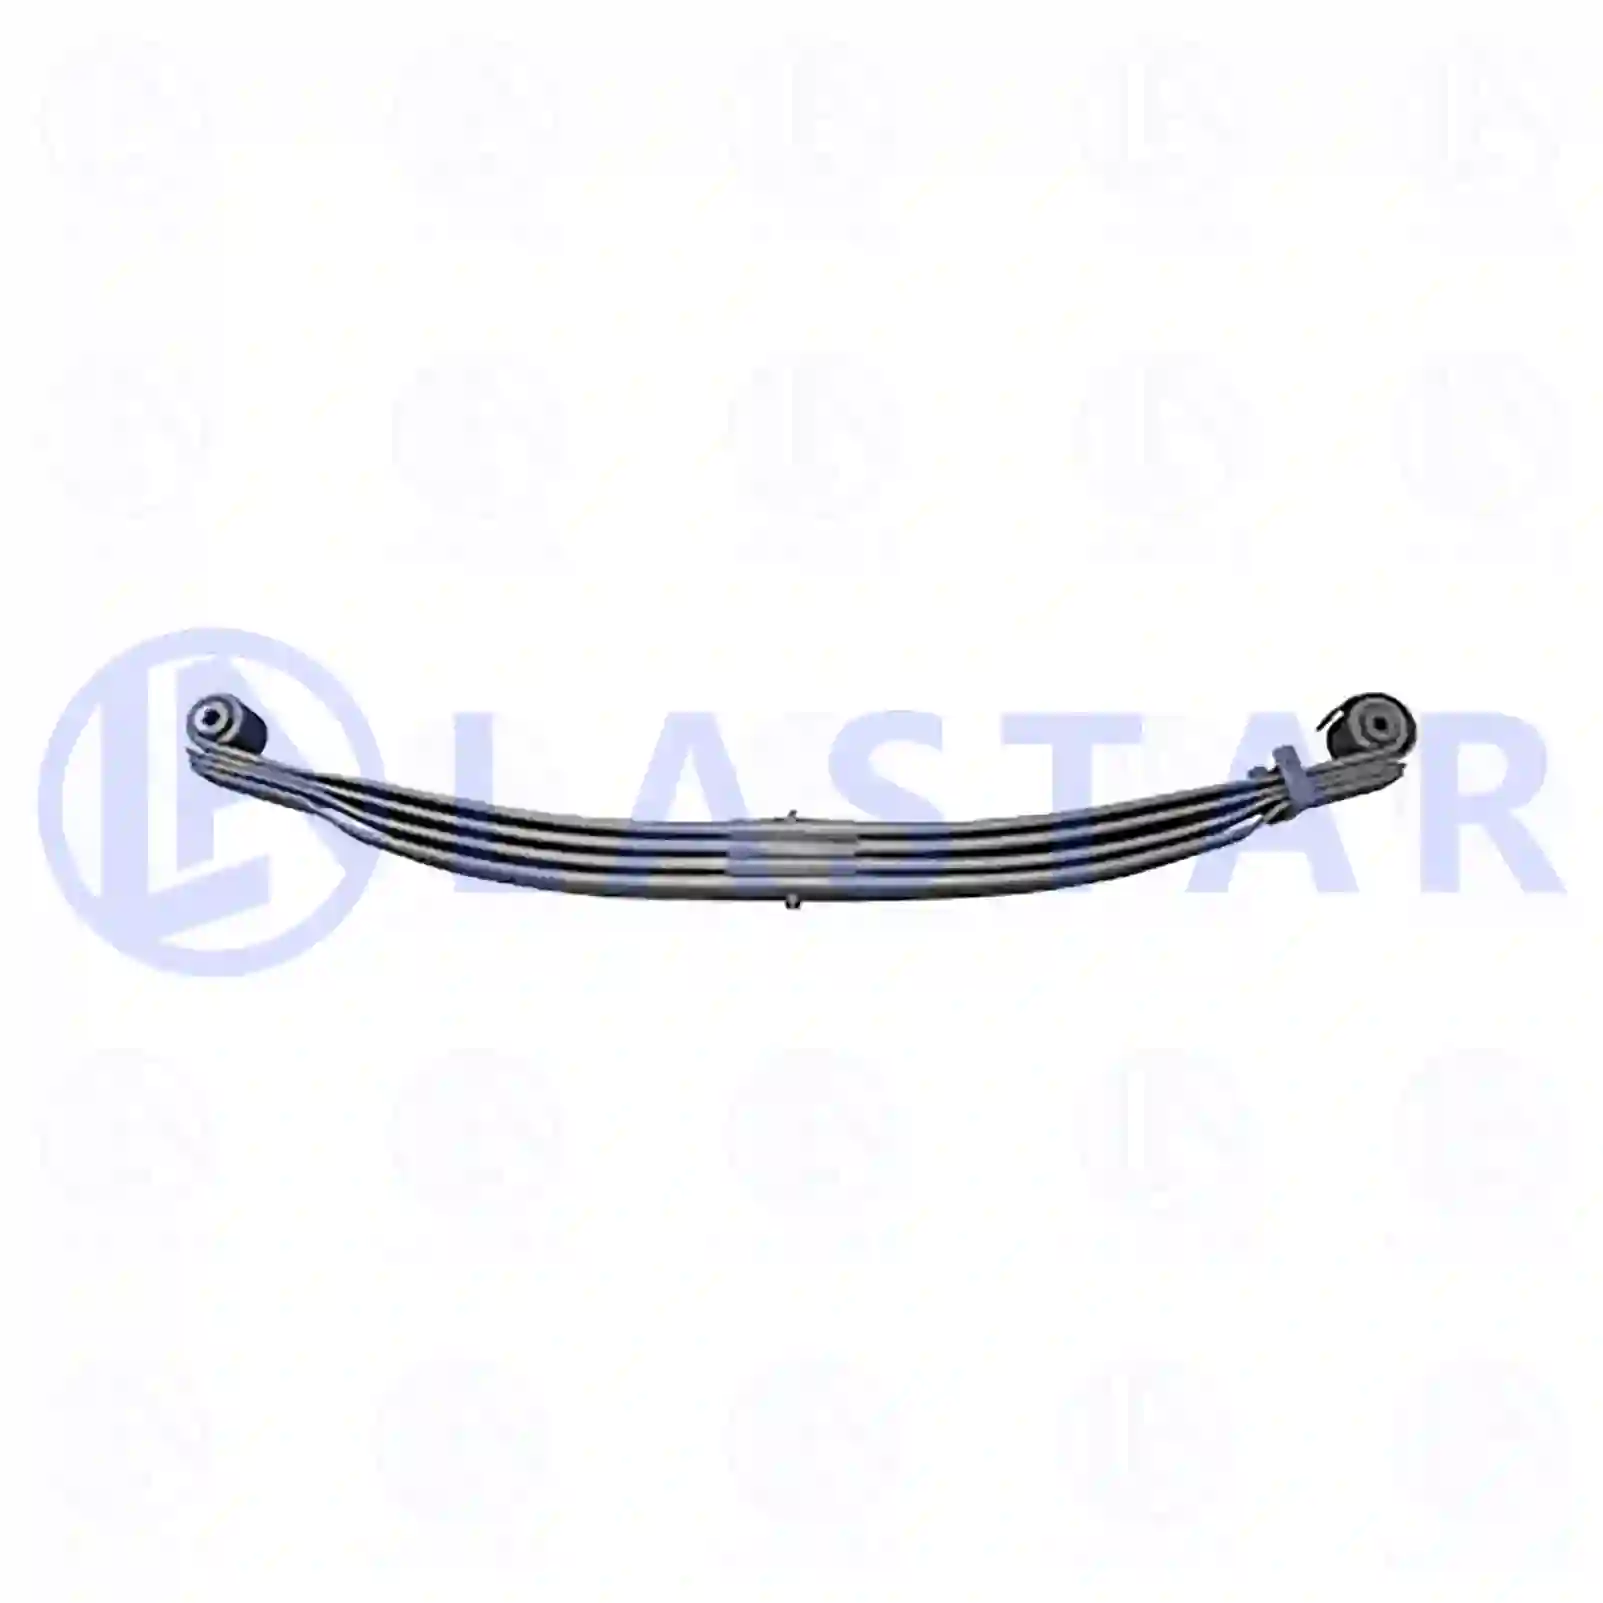 Leaf spring, front, 77727107, 6593200502 ||  77727107 Lastar Spare Part | Truck Spare Parts, Auotomotive Spare Parts Leaf spring, front, 77727107, 6593200502 ||  77727107 Lastar Spare Part | Truck Spare Parts, Auotomotive Spare Parts